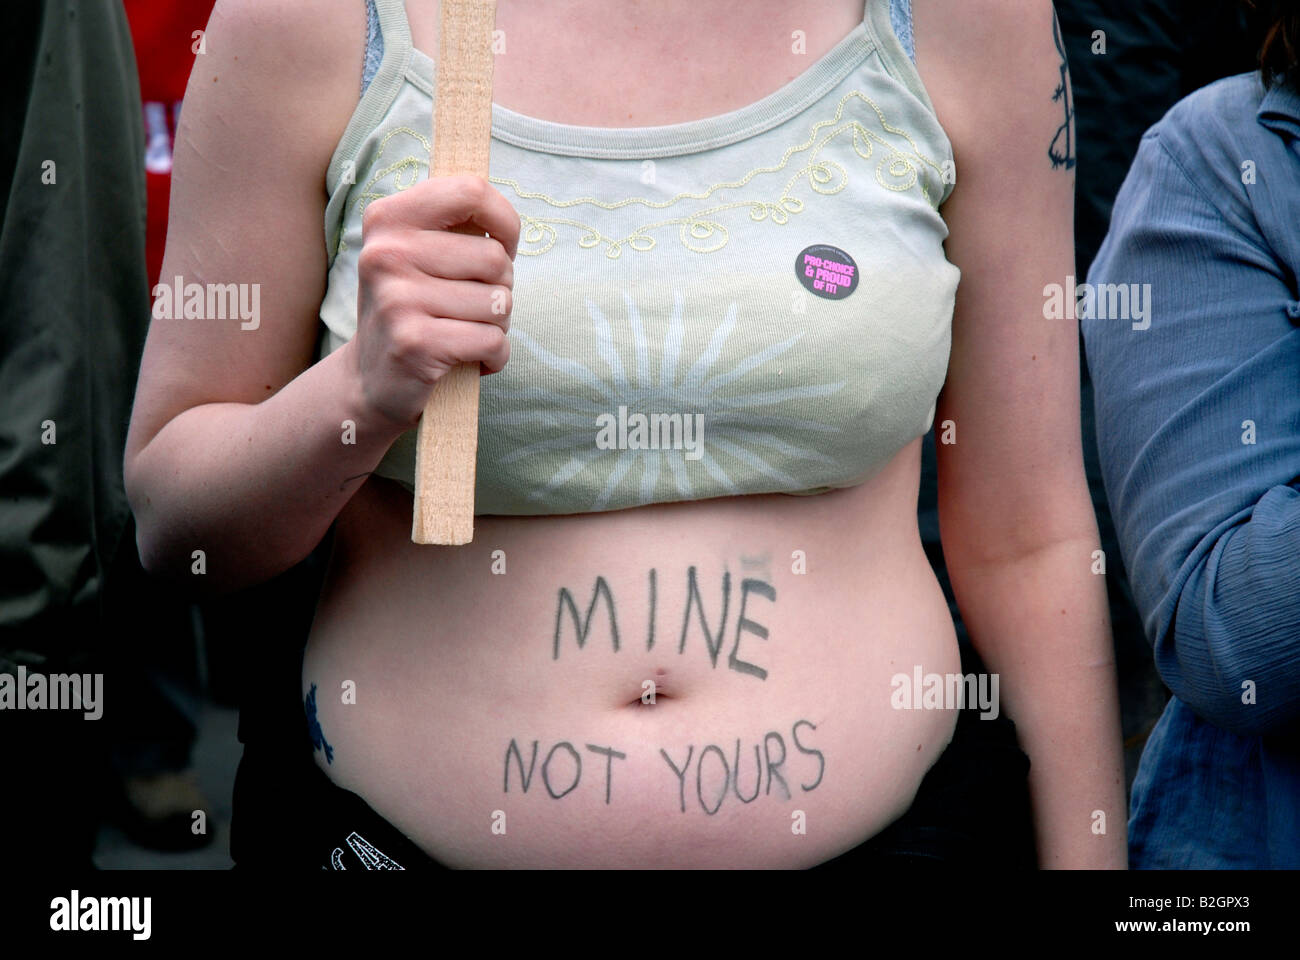 Pro-choice protest group opposing bill lowering limit for abortions being brought down by four weeks to 20 weeks. Stock Photo